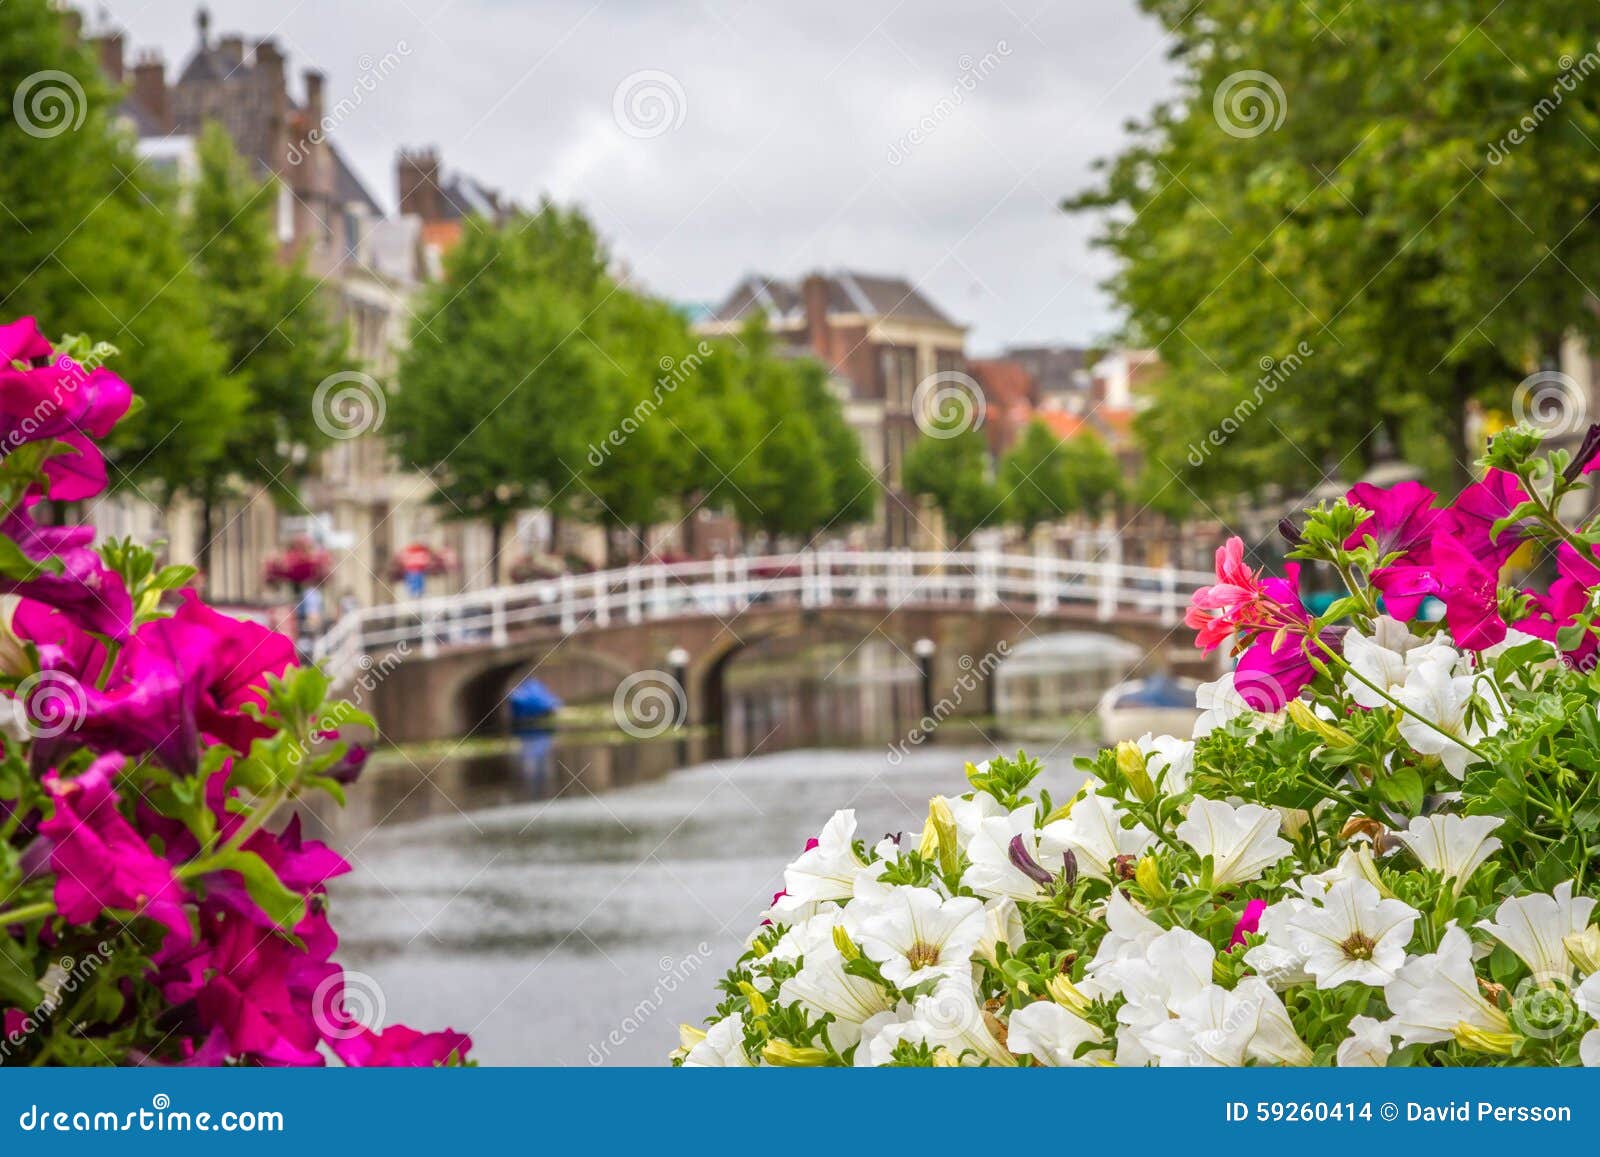 one of many canals in leiden, holland